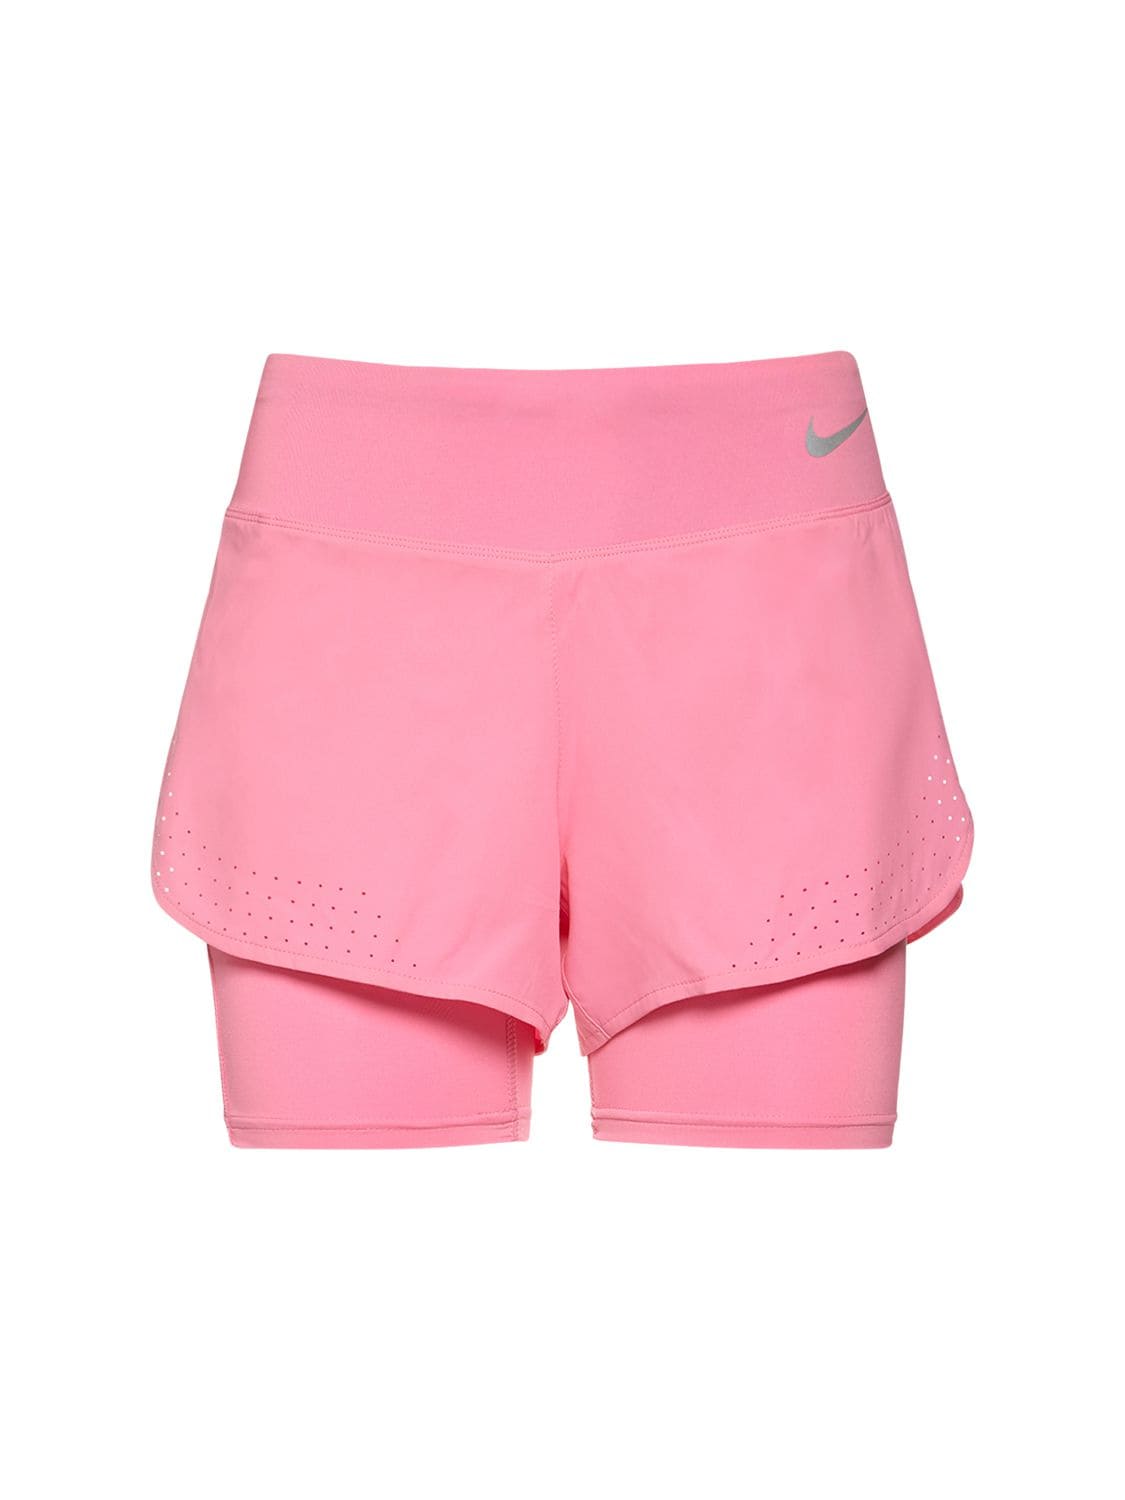 Nike Eclipse 2-in-1 Running Shorts In Pink Glow